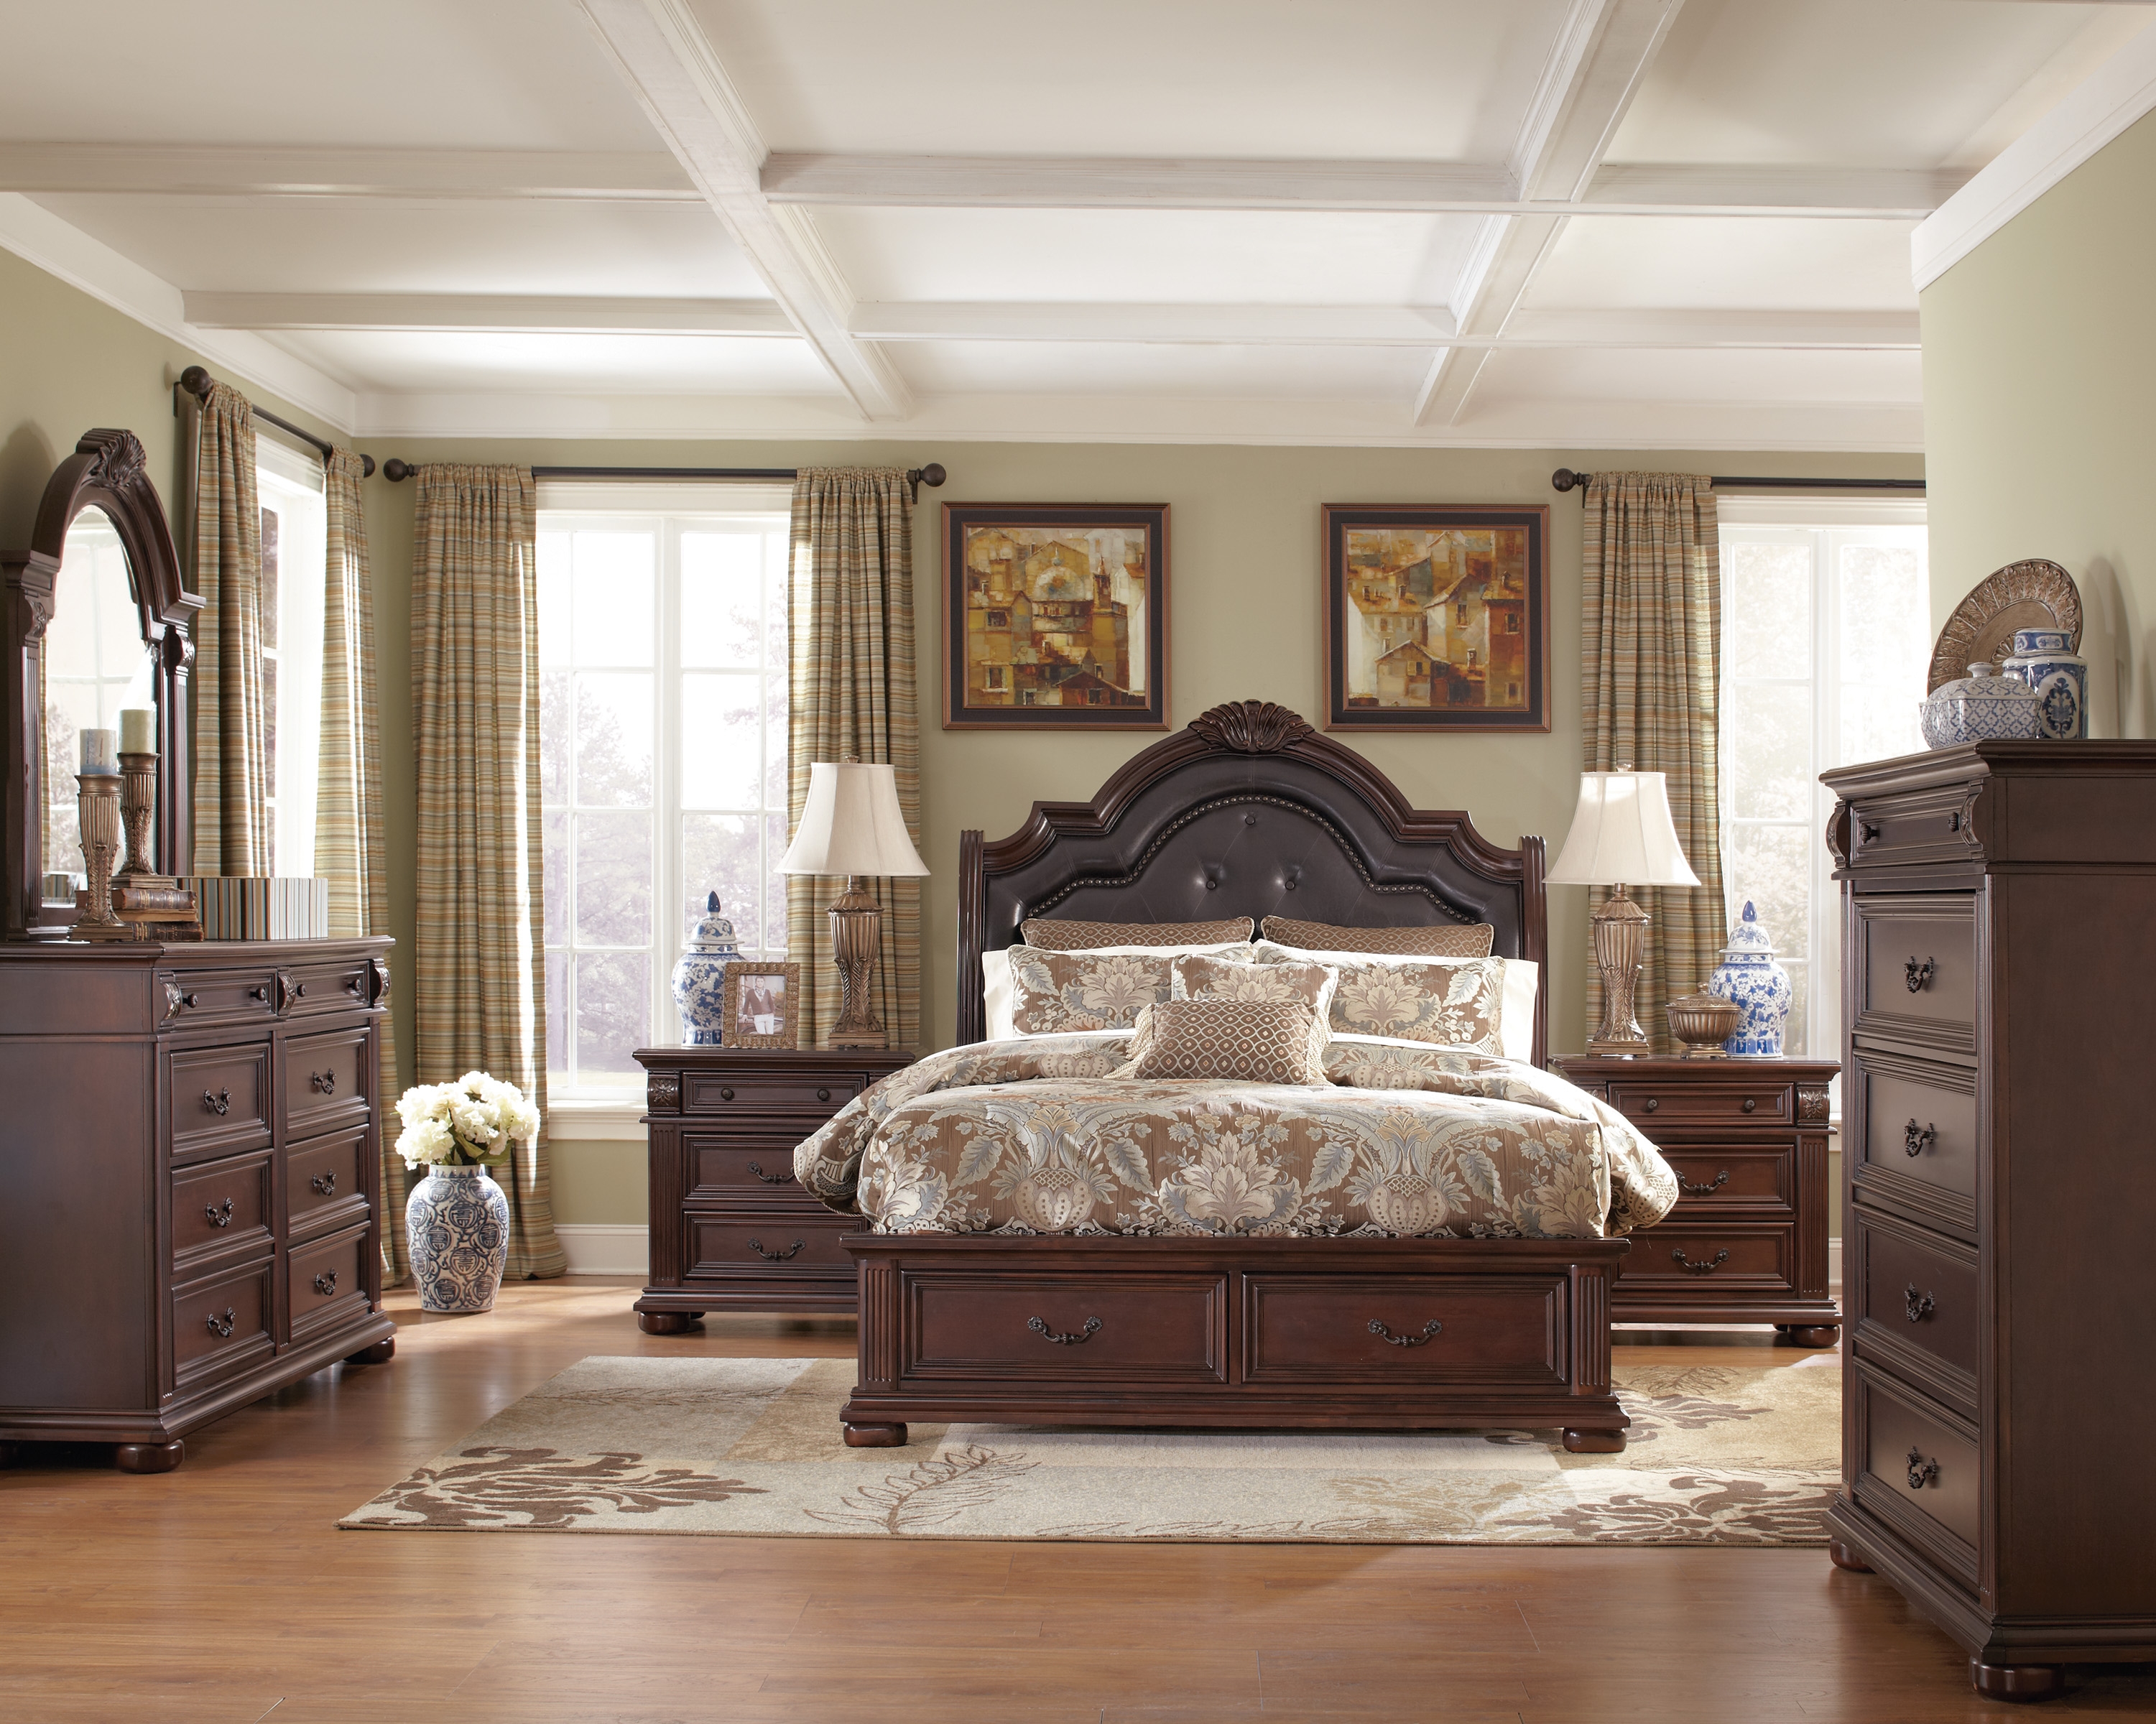 traditional bedroom furniture designs photo - 10